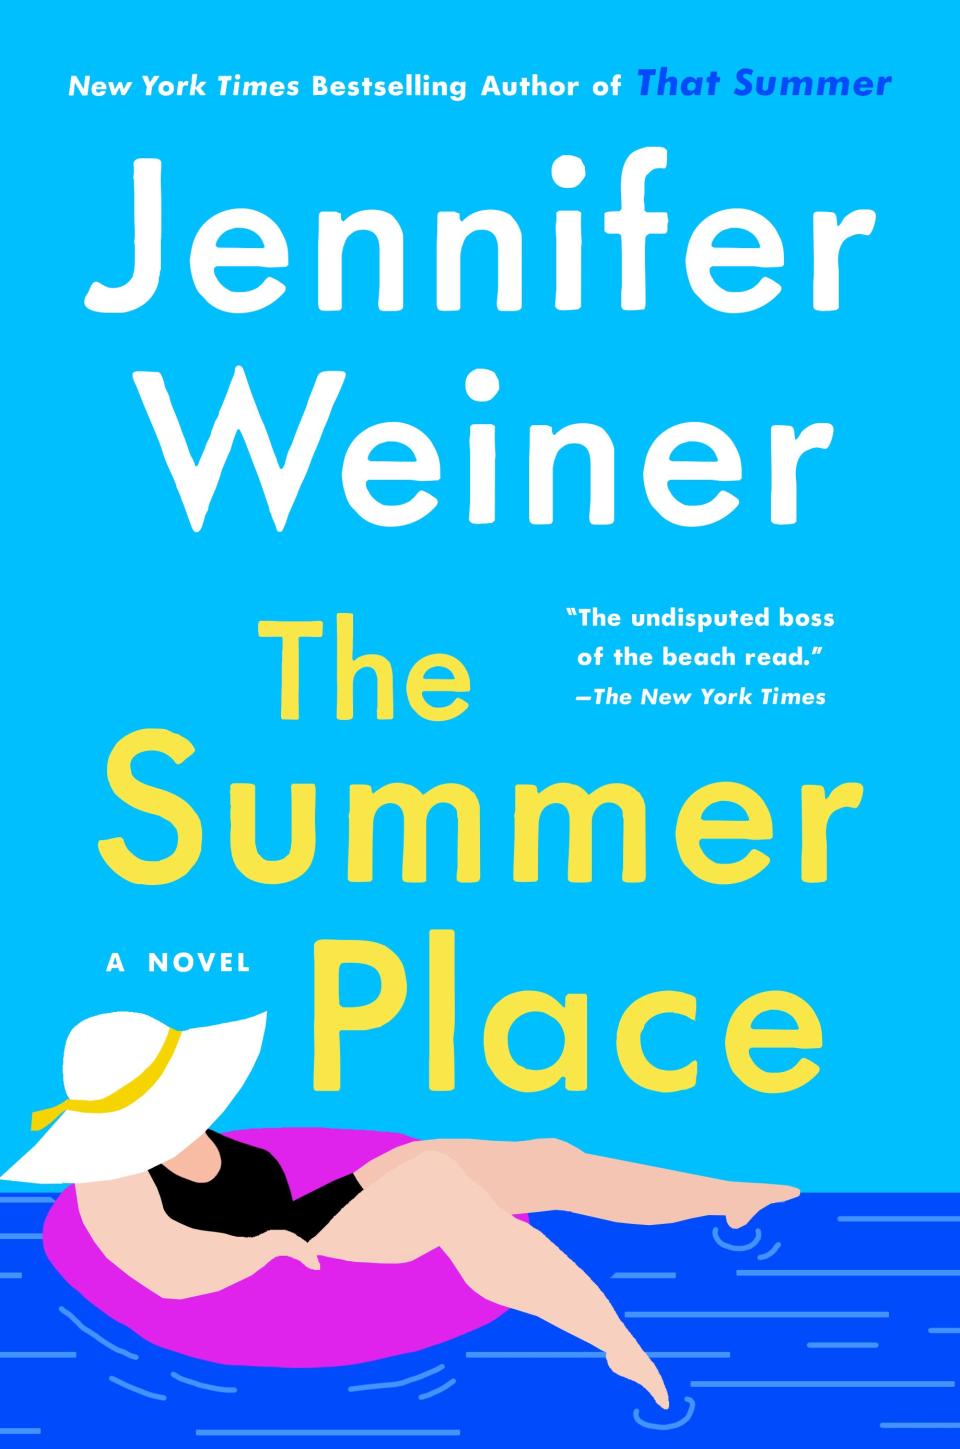 Jennifer Weiner's "The Summer Place" hits shelves May 10.